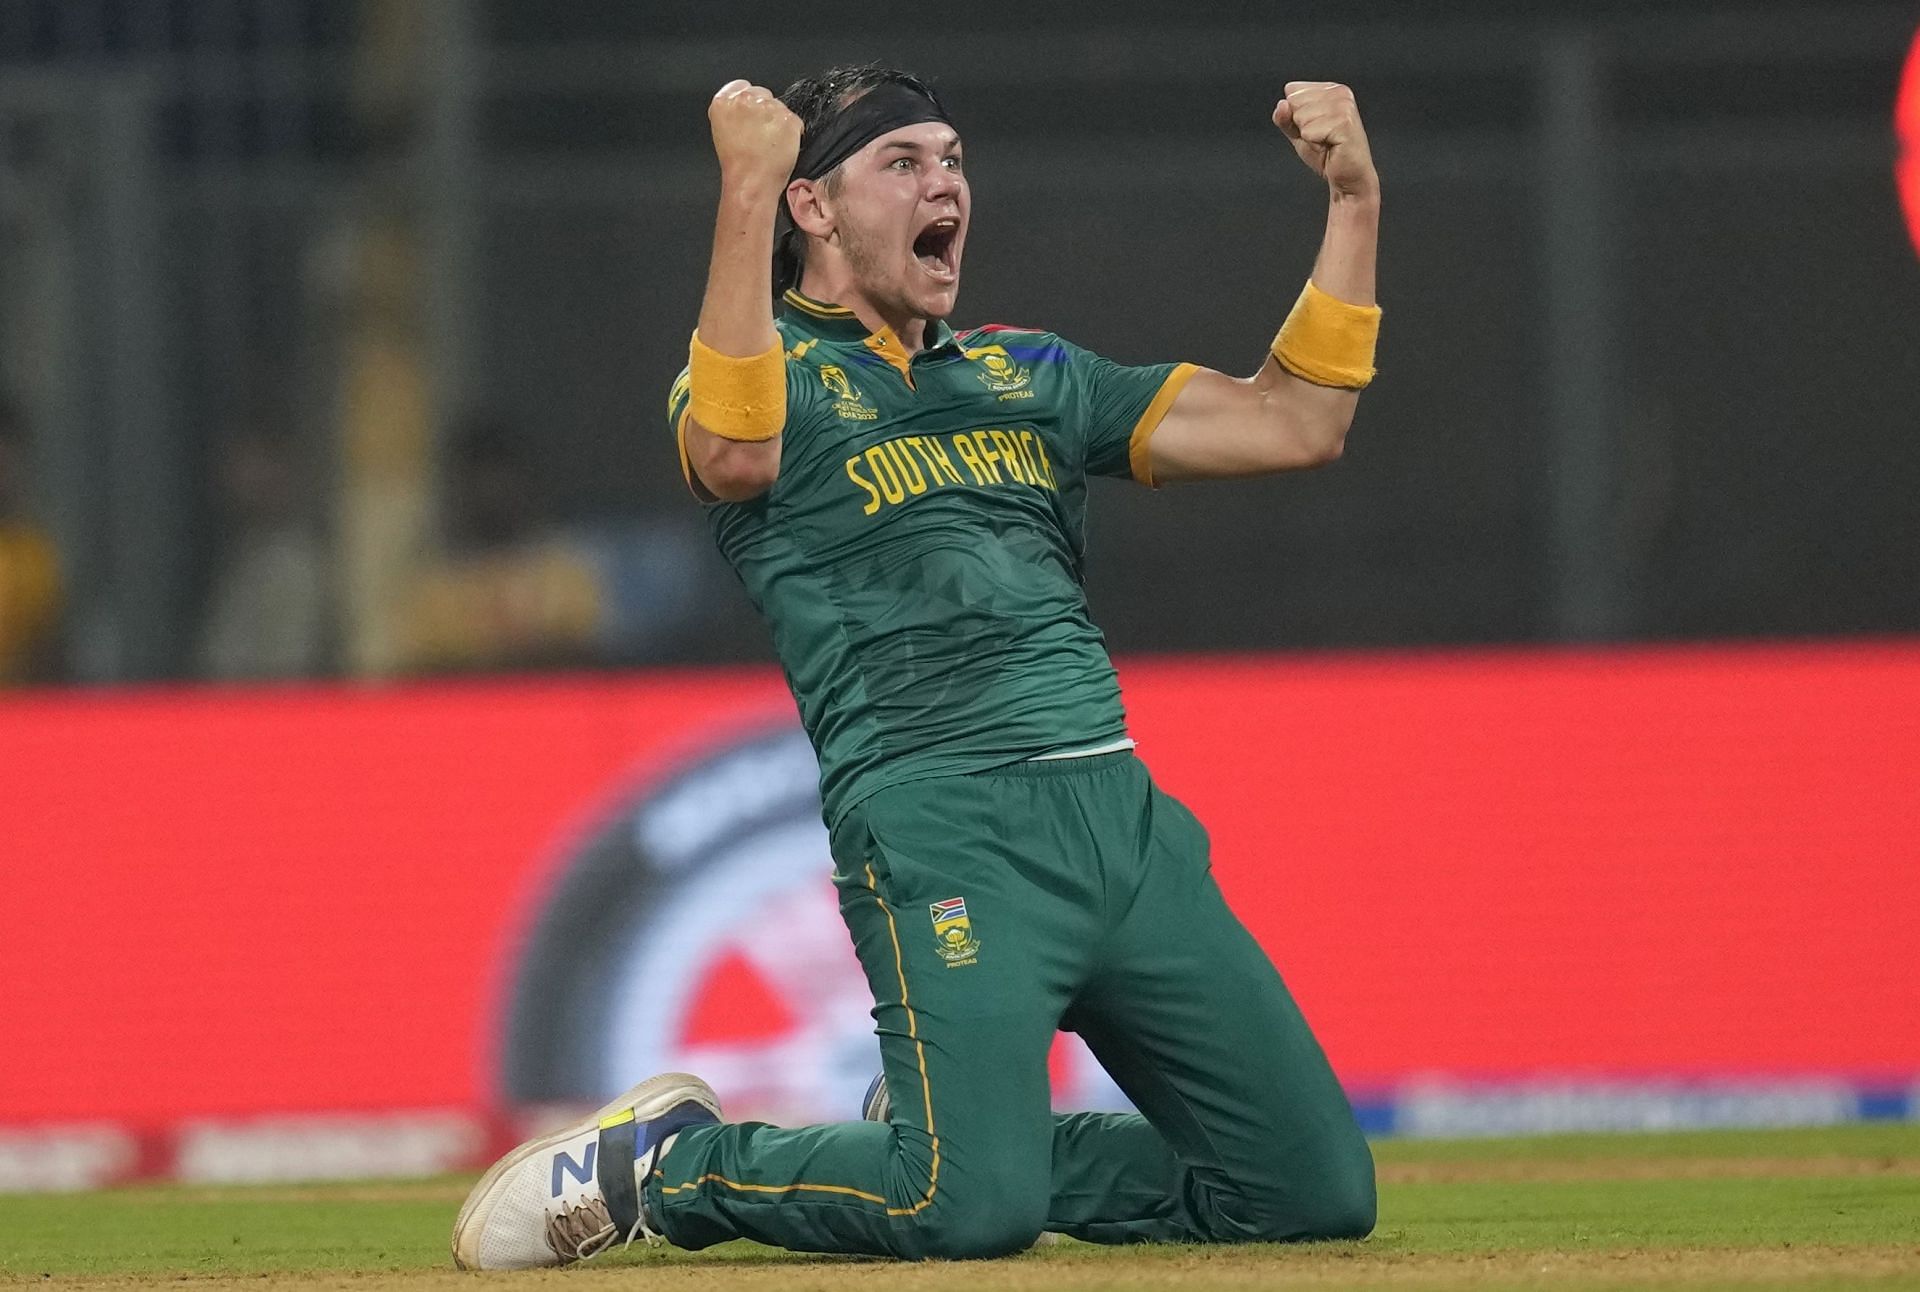 The South African pacers dismantled the England batting lineup in their last game at the Wankhede. [P/C: AP]